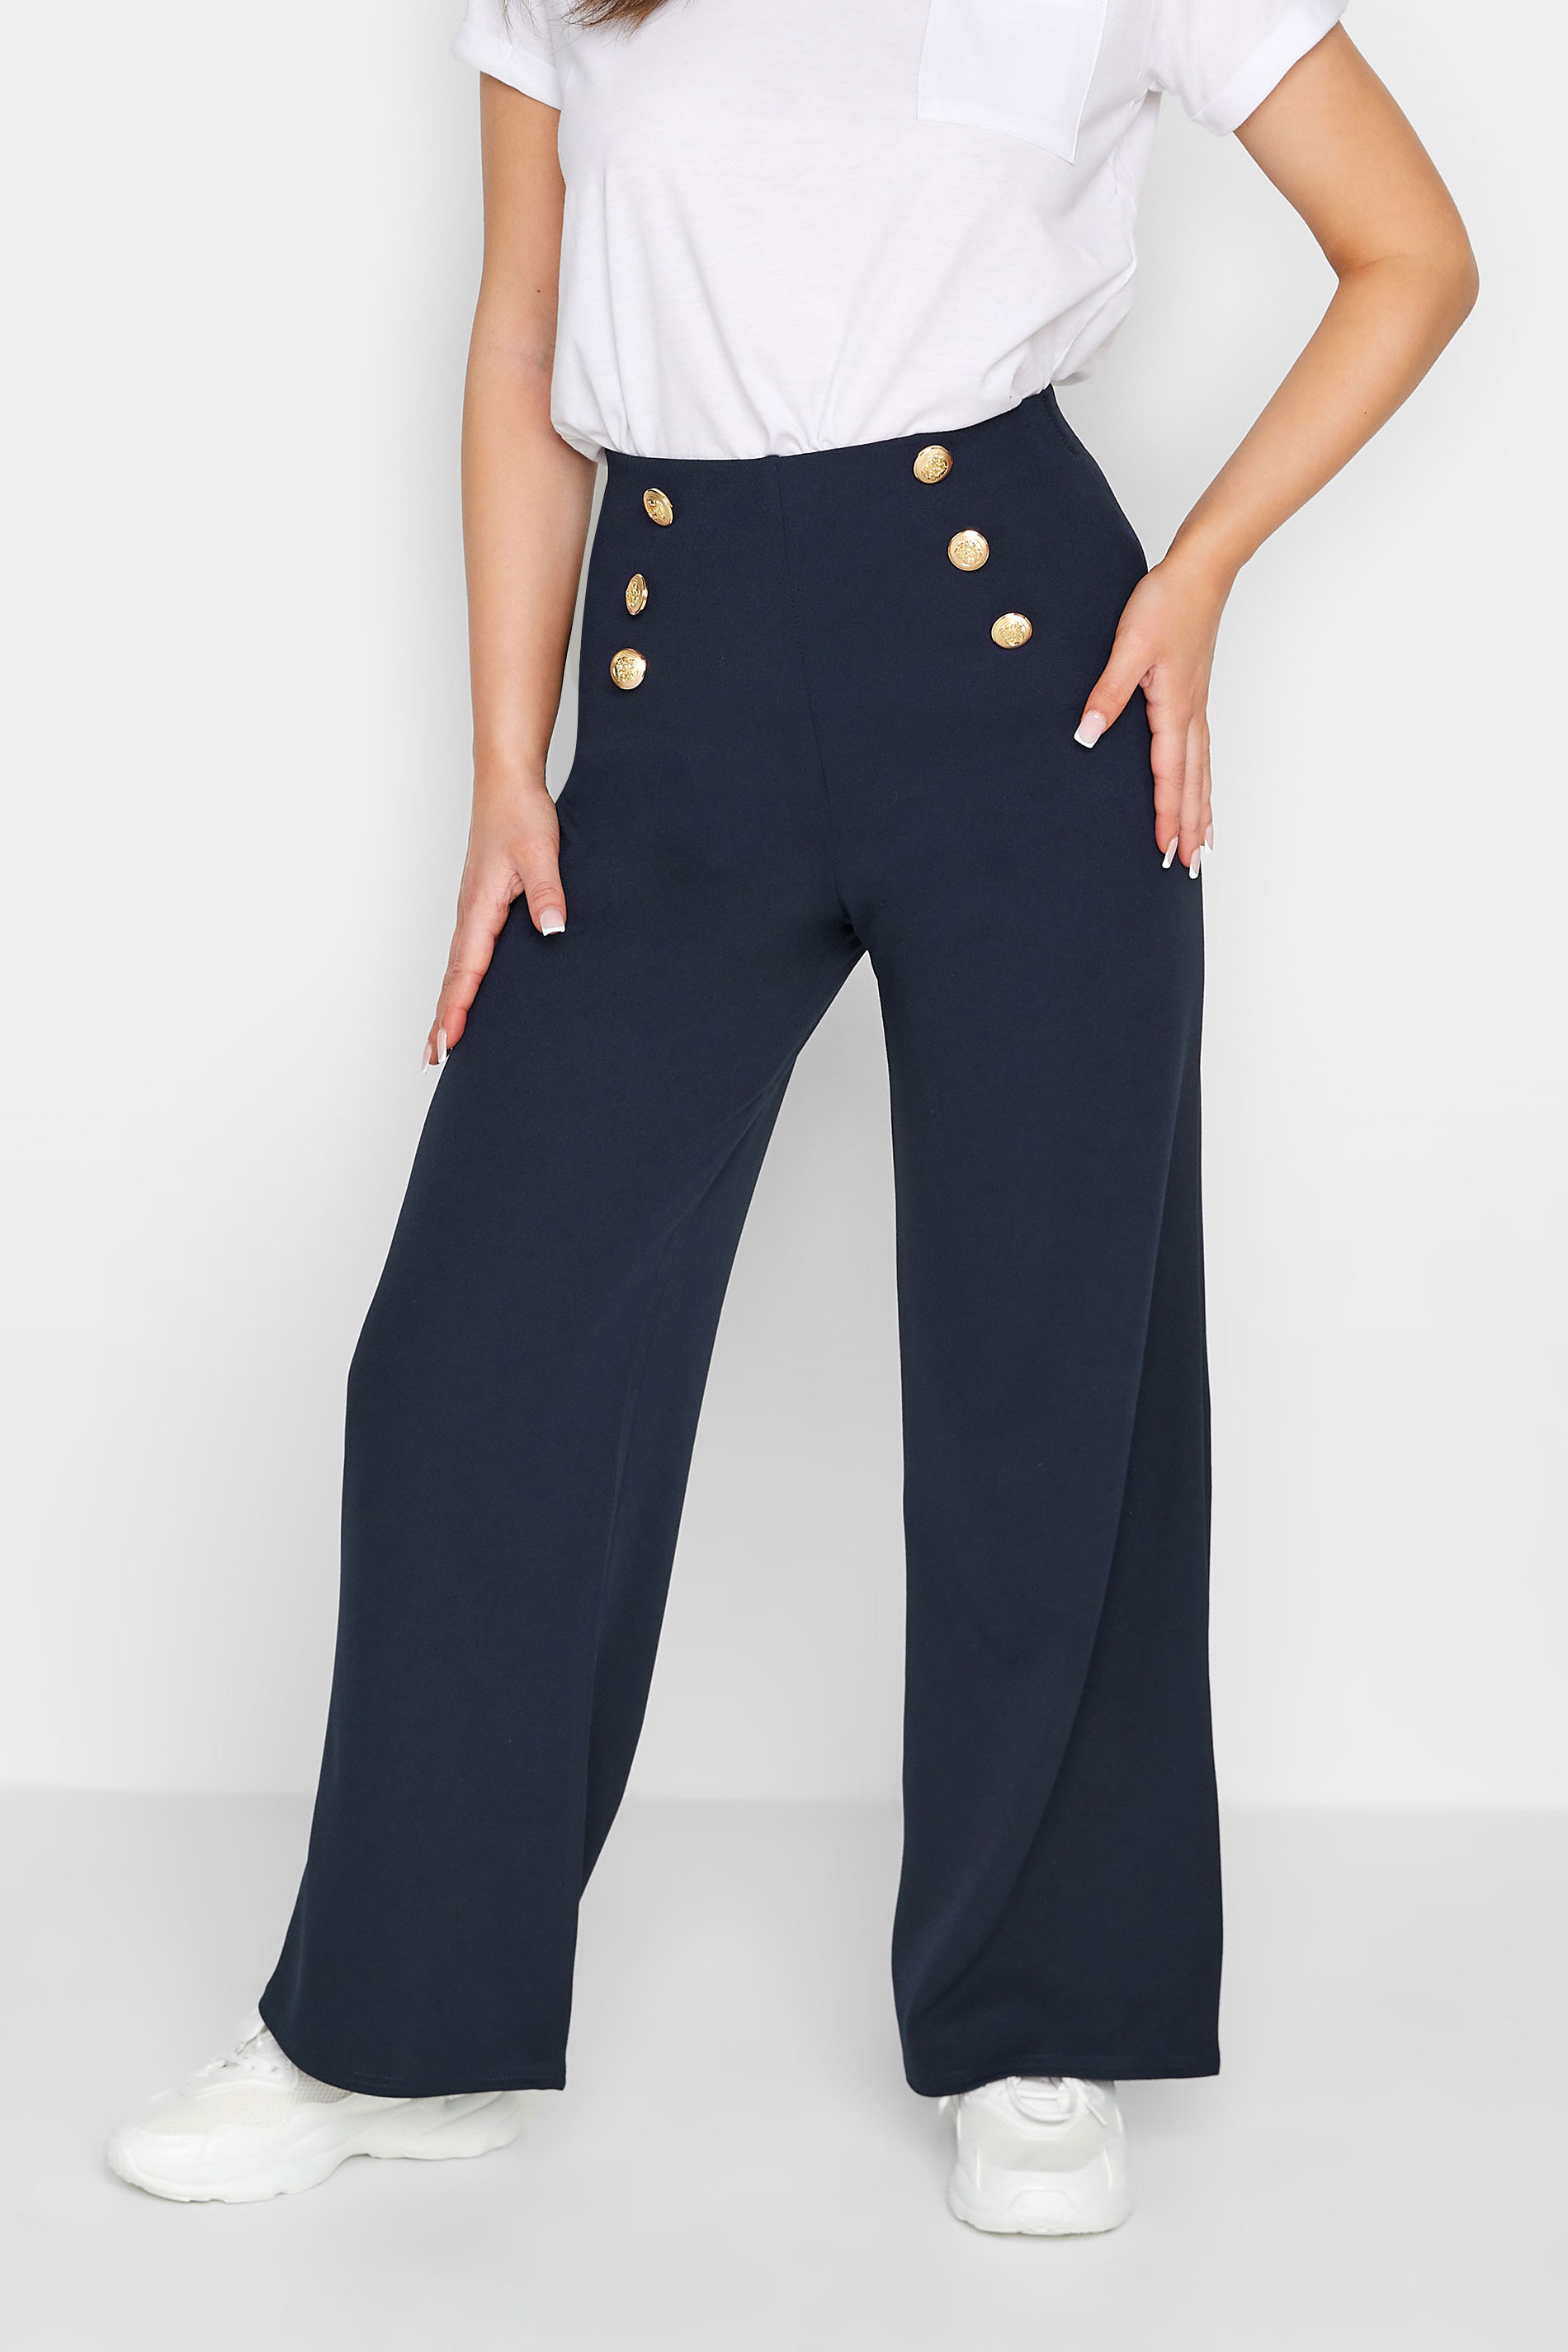 Jemma High Waisted Button Front Detail Trouser in Khaki | ikrush